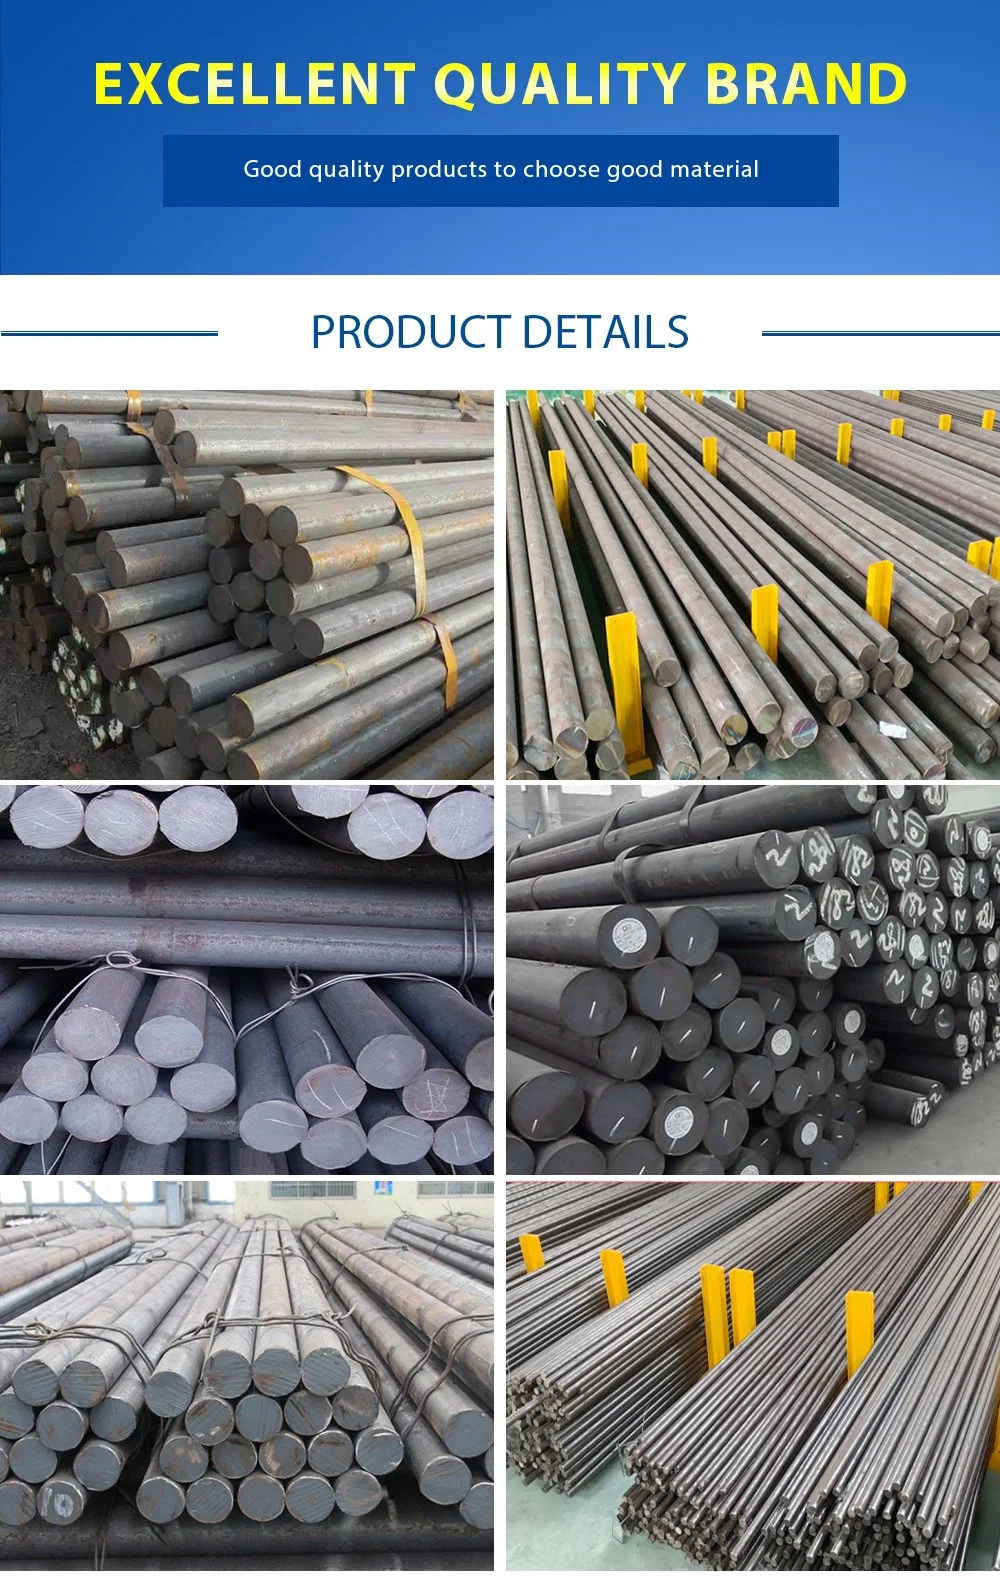 AISI 1020 1045 1055 1084 4140 C45 A36 Mild Hot Rolled Carbon Steel Round Bar Steel Bar with Good Quality